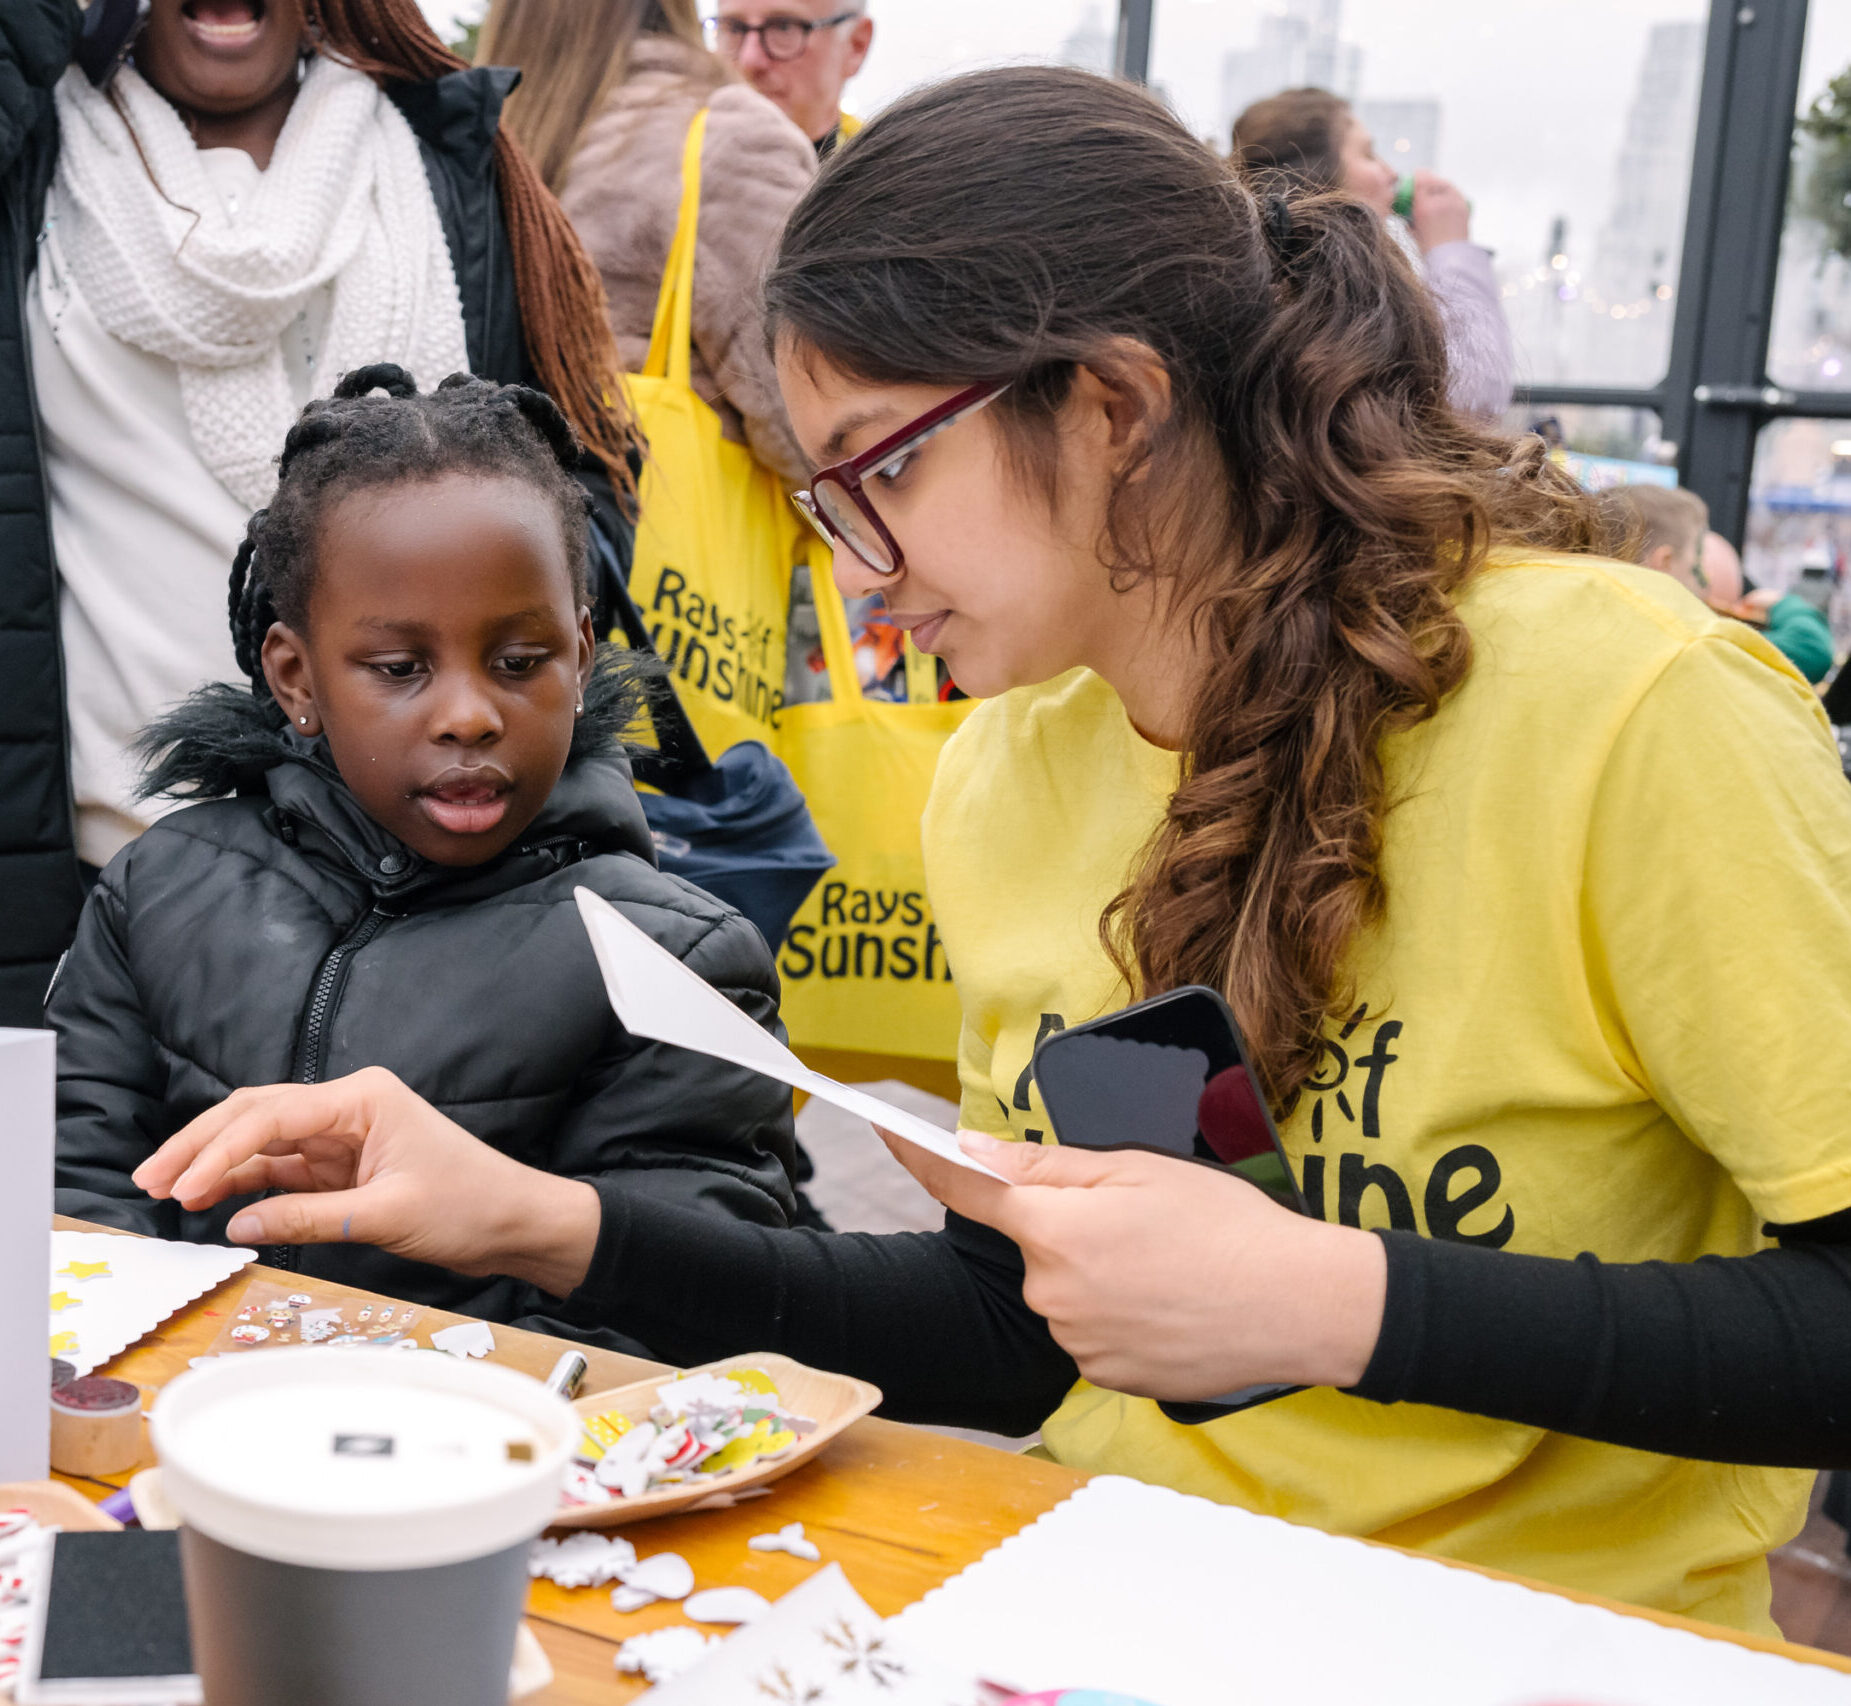 Rays of Sunshine seeks volunteers to help brighten the lives of more seriously ill children and young people